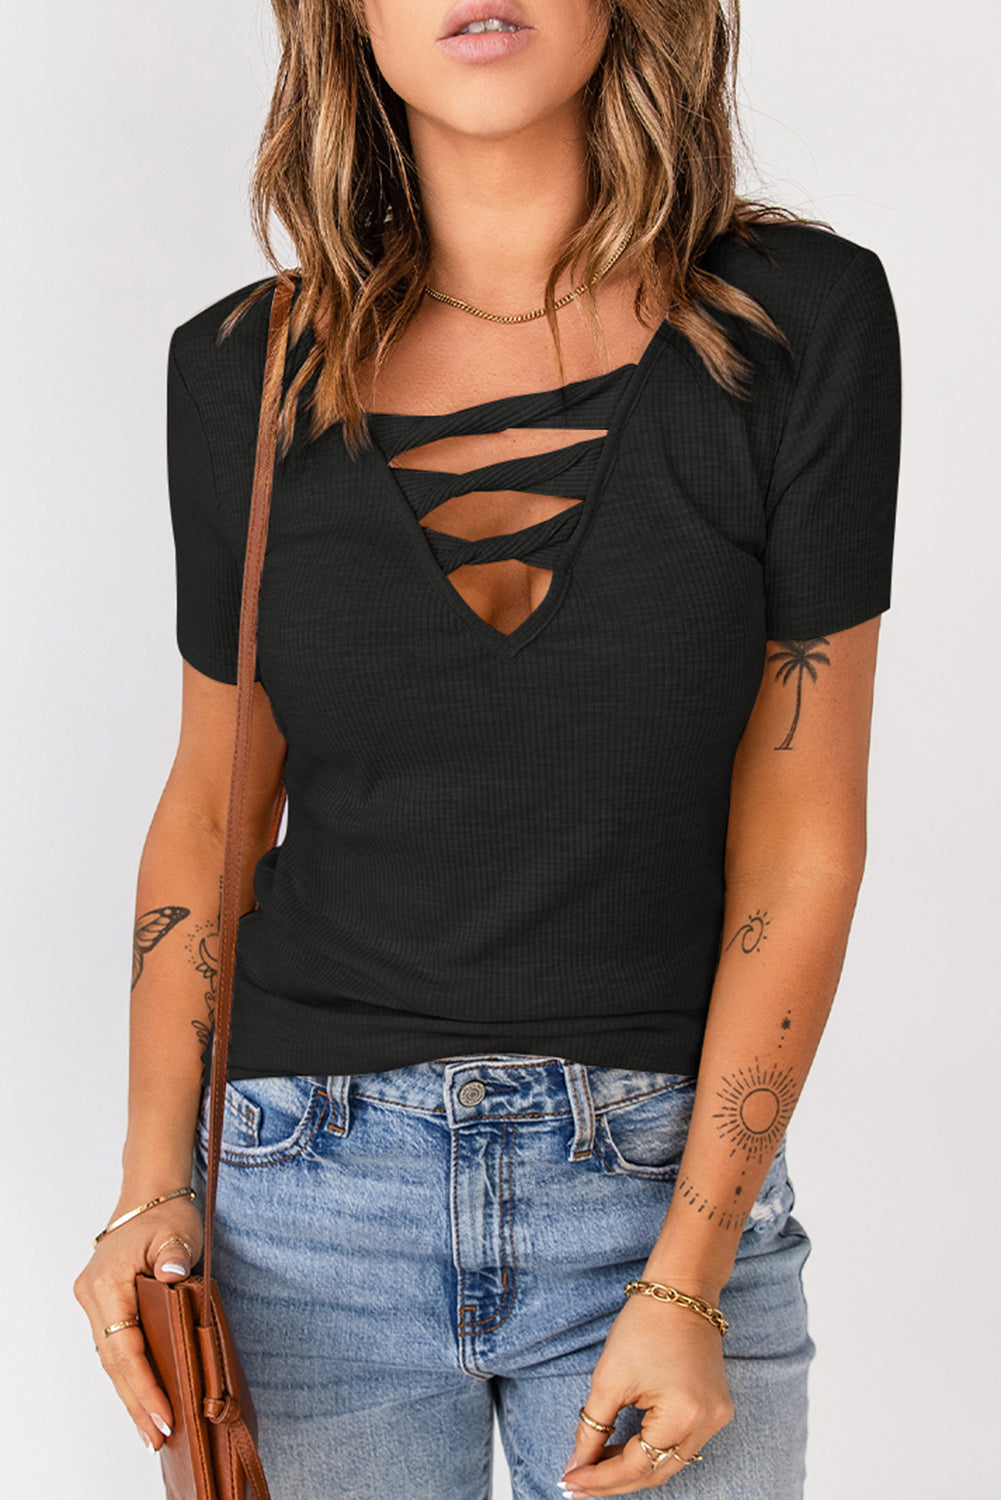 Chic and Comfy: Strappy Ribbed Knit T-Shirt for Effortless Style ShopOnlyDeal